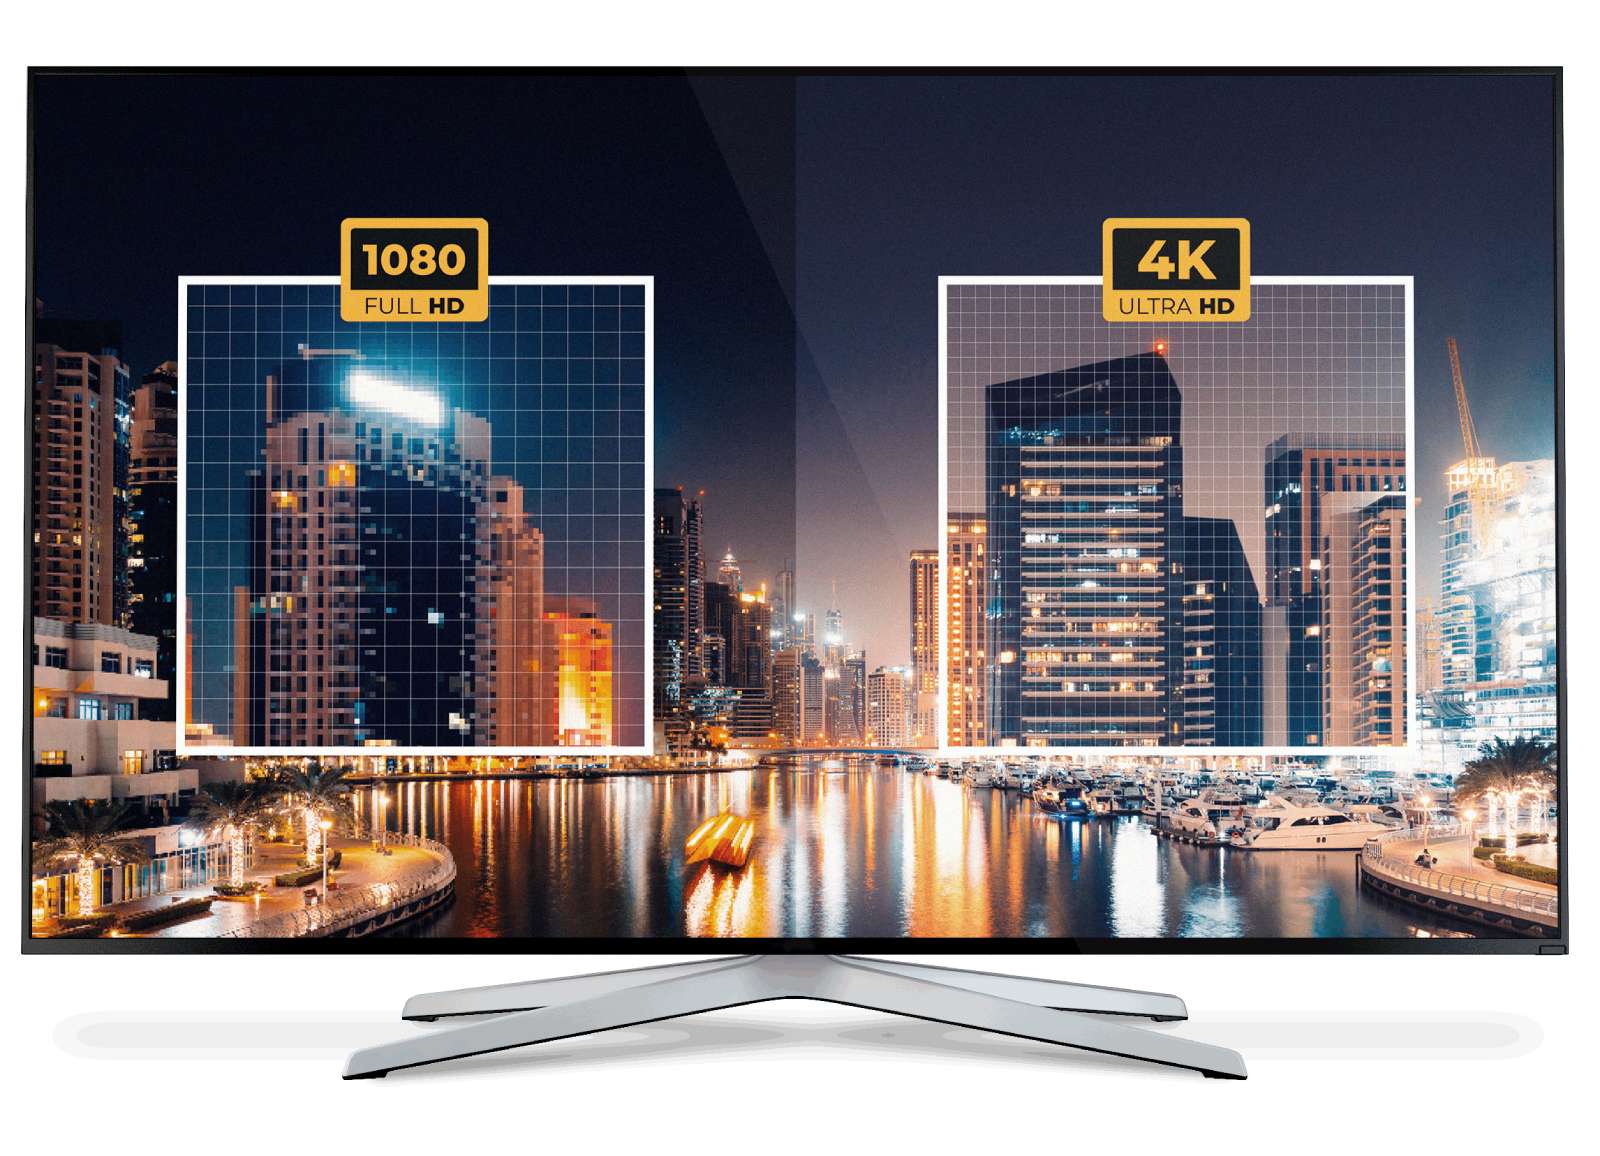 What is the difference between 4K and Full HD, which is better?